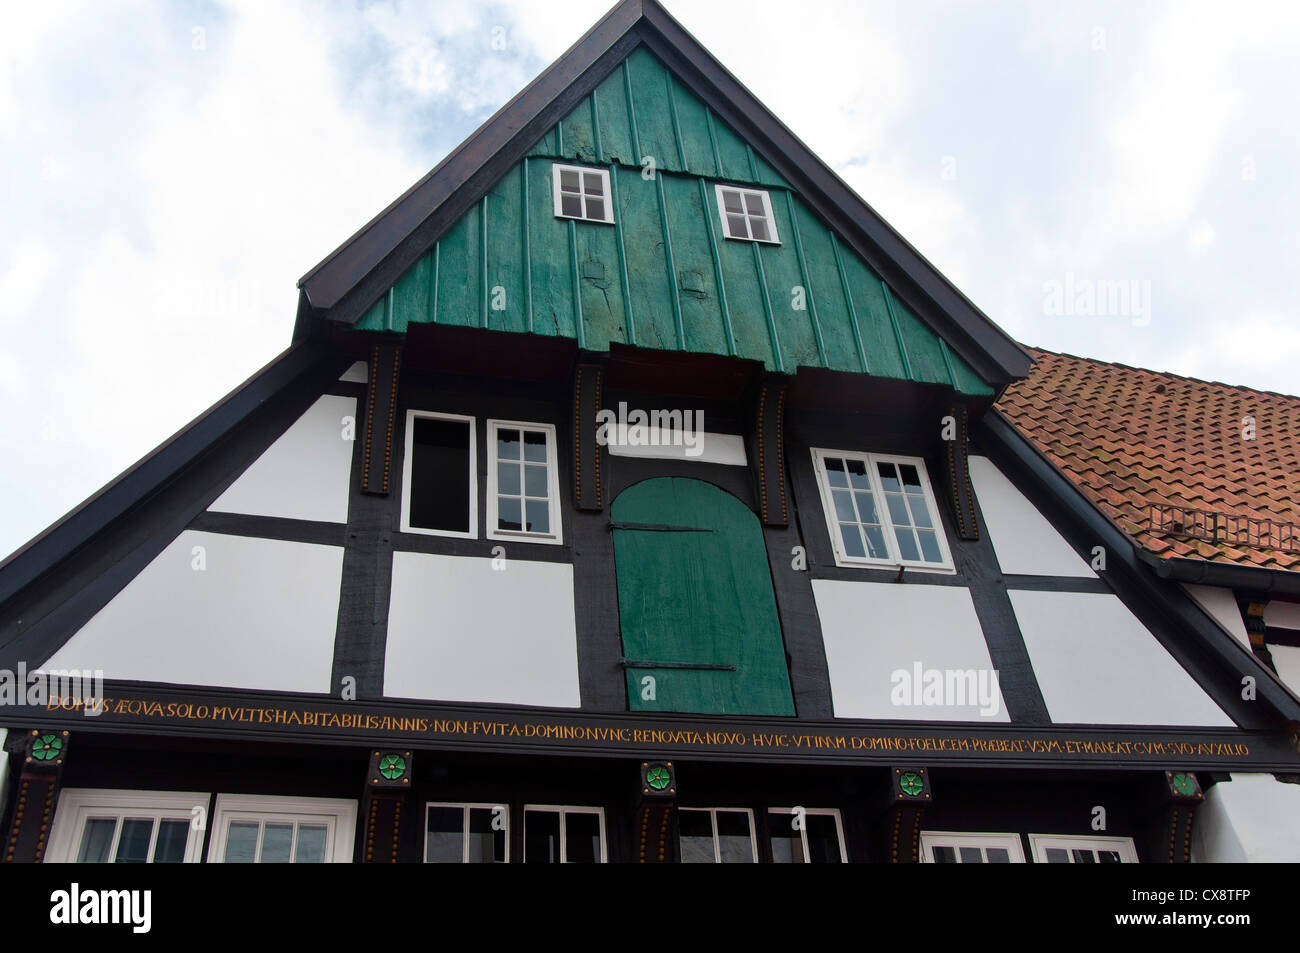 Medieval Timbered Fachwerk House, Osnabruck, Germany Stock Photo